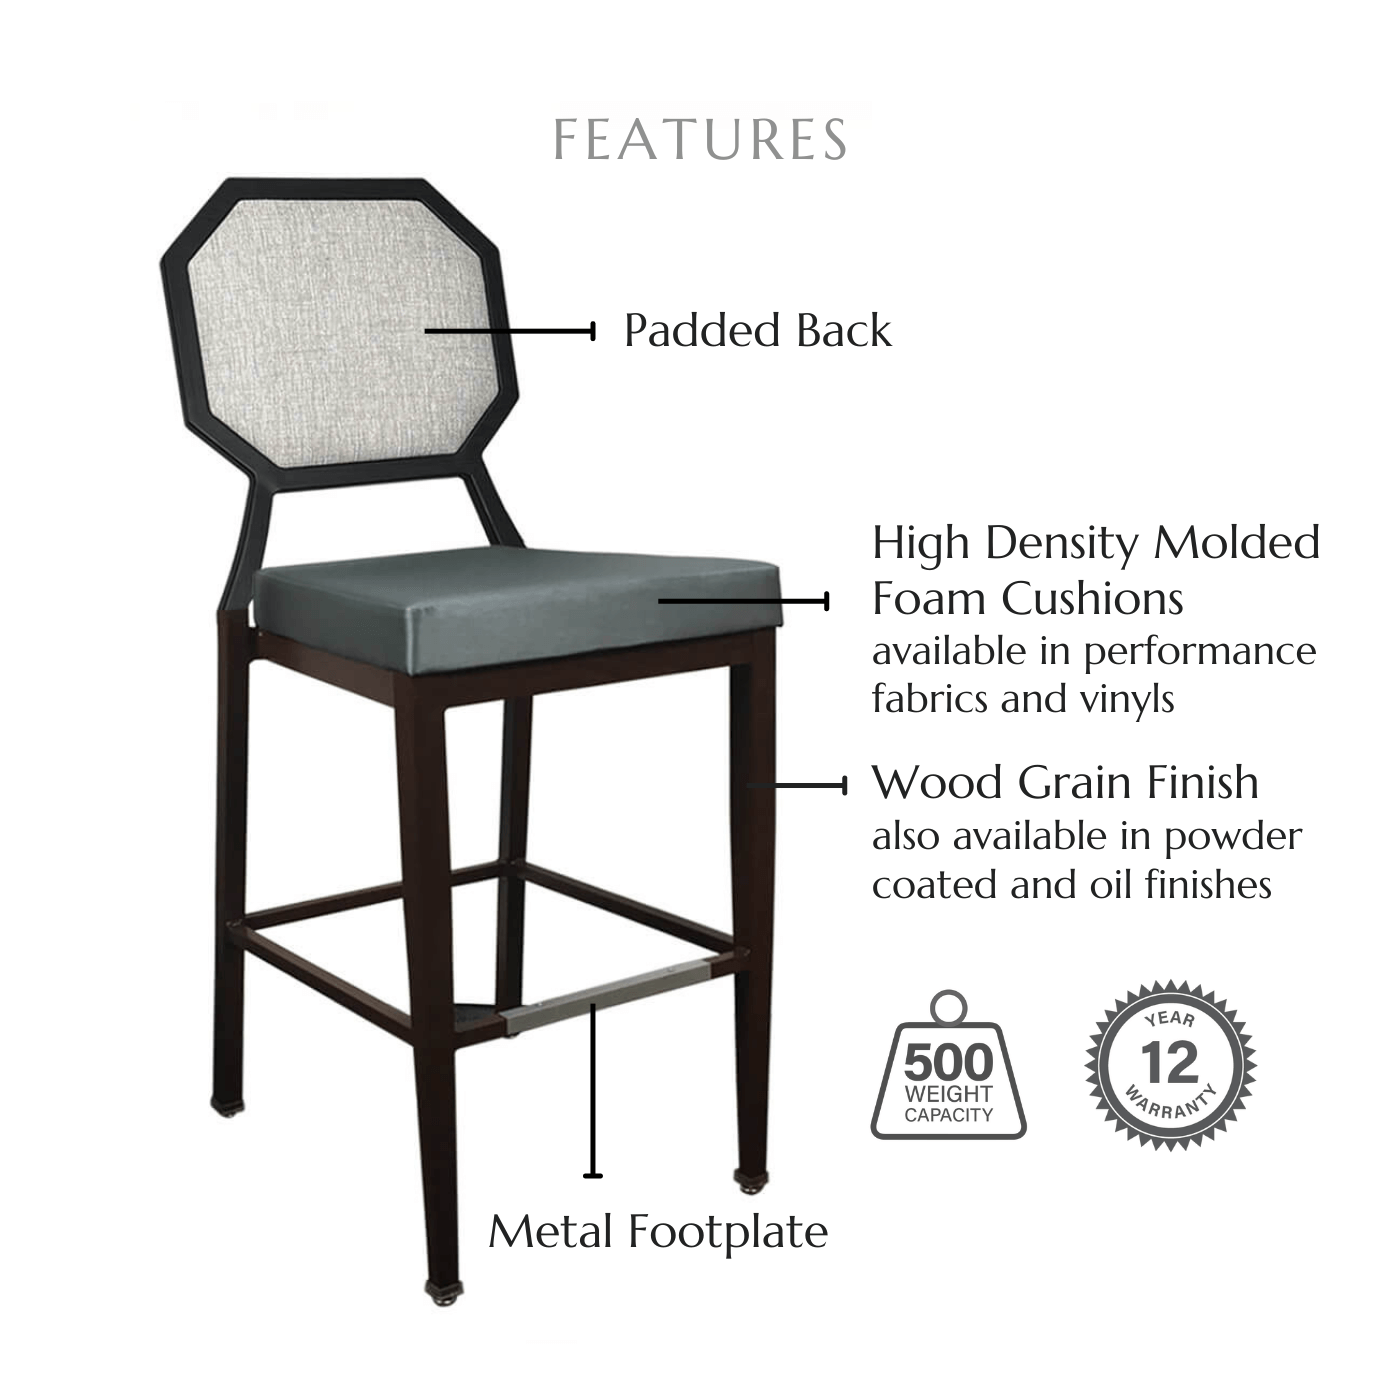 Featuring a padded back, high density molded foam cushions available in performance fabrics and vinyls, metal footplate, wood grain finish also available in powder coated and oil based finishes. This stool has a 500 lb weight capacity with a 12-year warranty.